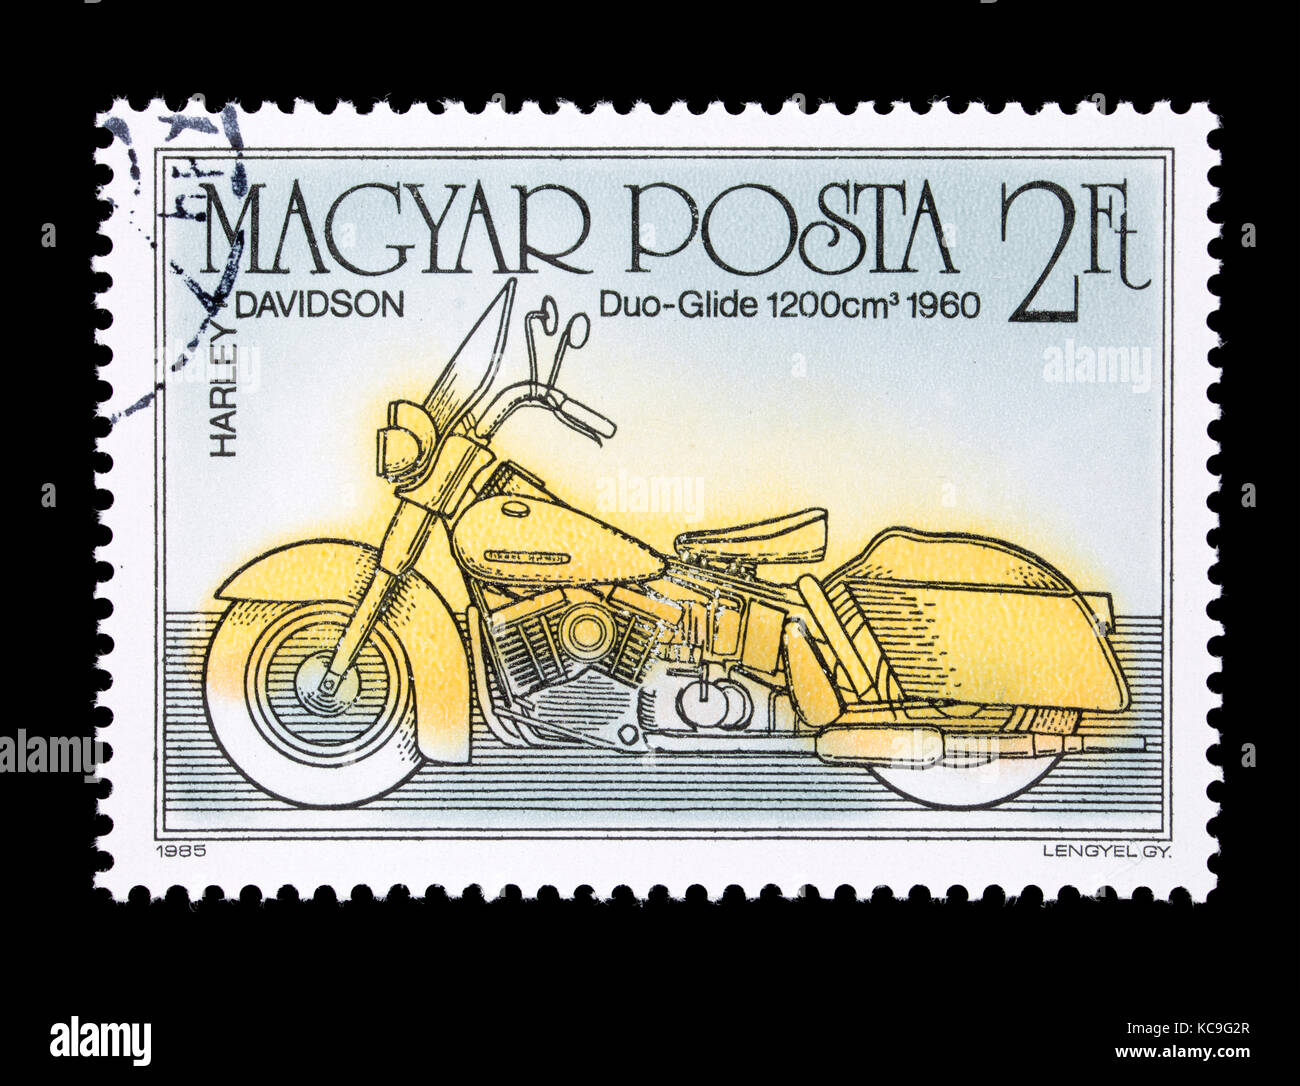 Postage stamp from Hungary depicting a Harley-Davidson Duo-Glide from 1960, centennial of the motorcycle. Stock Photo